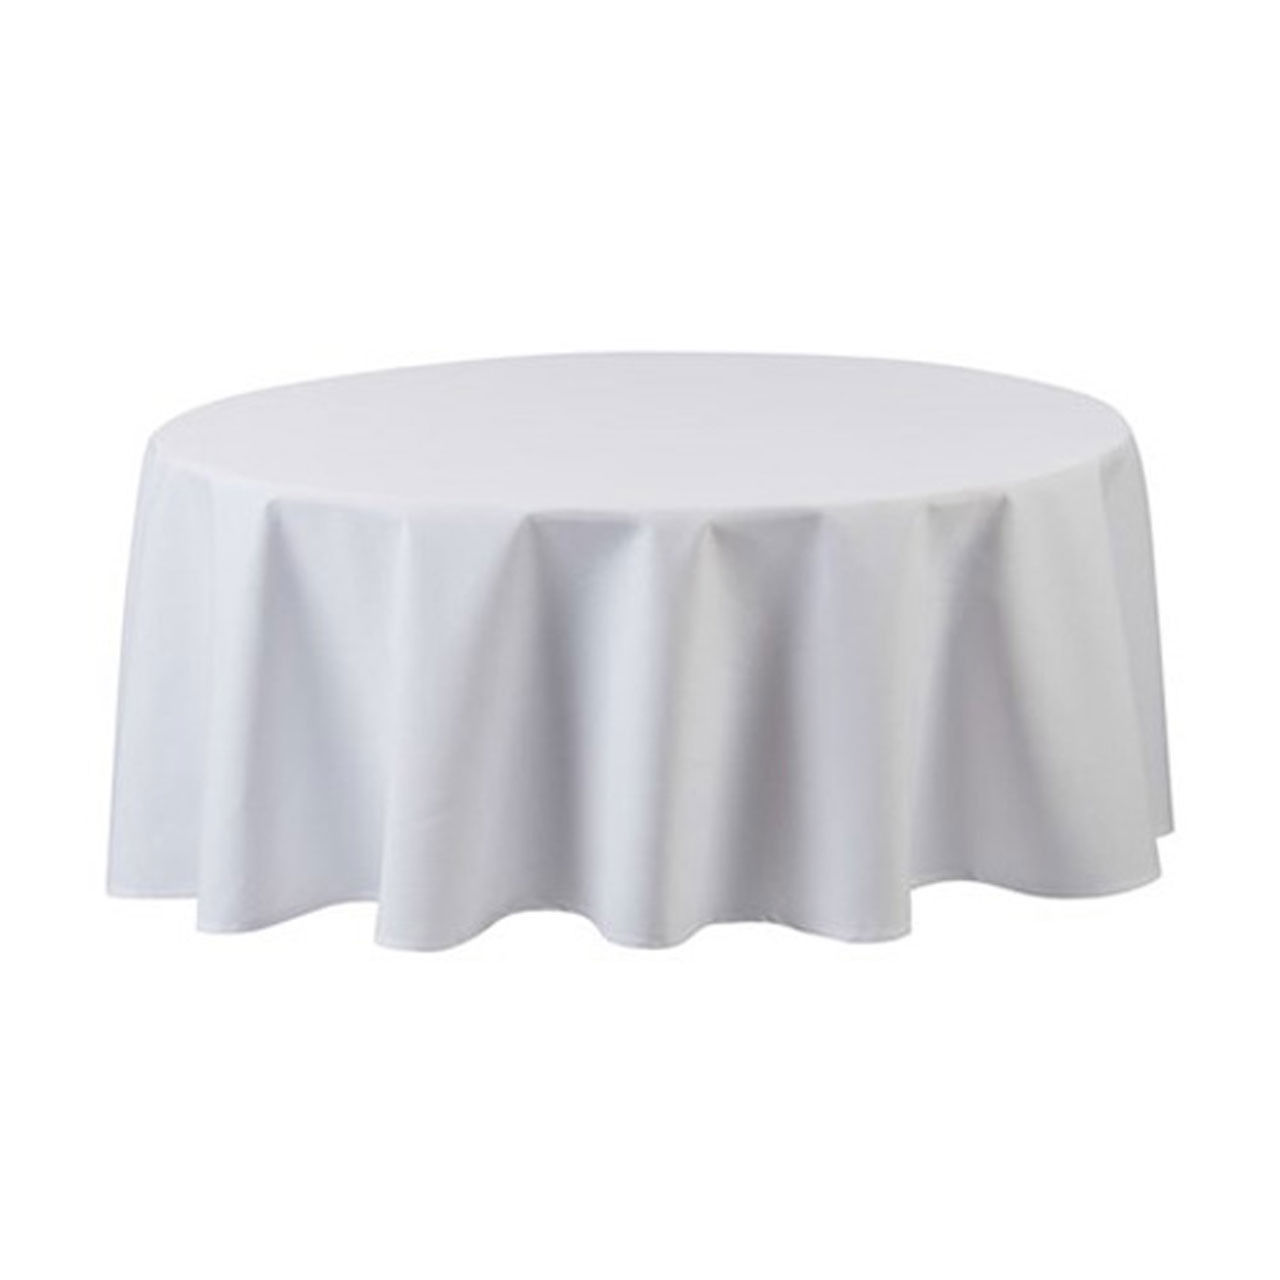 What is the material composition of the 90 round tablecloth in bulk?